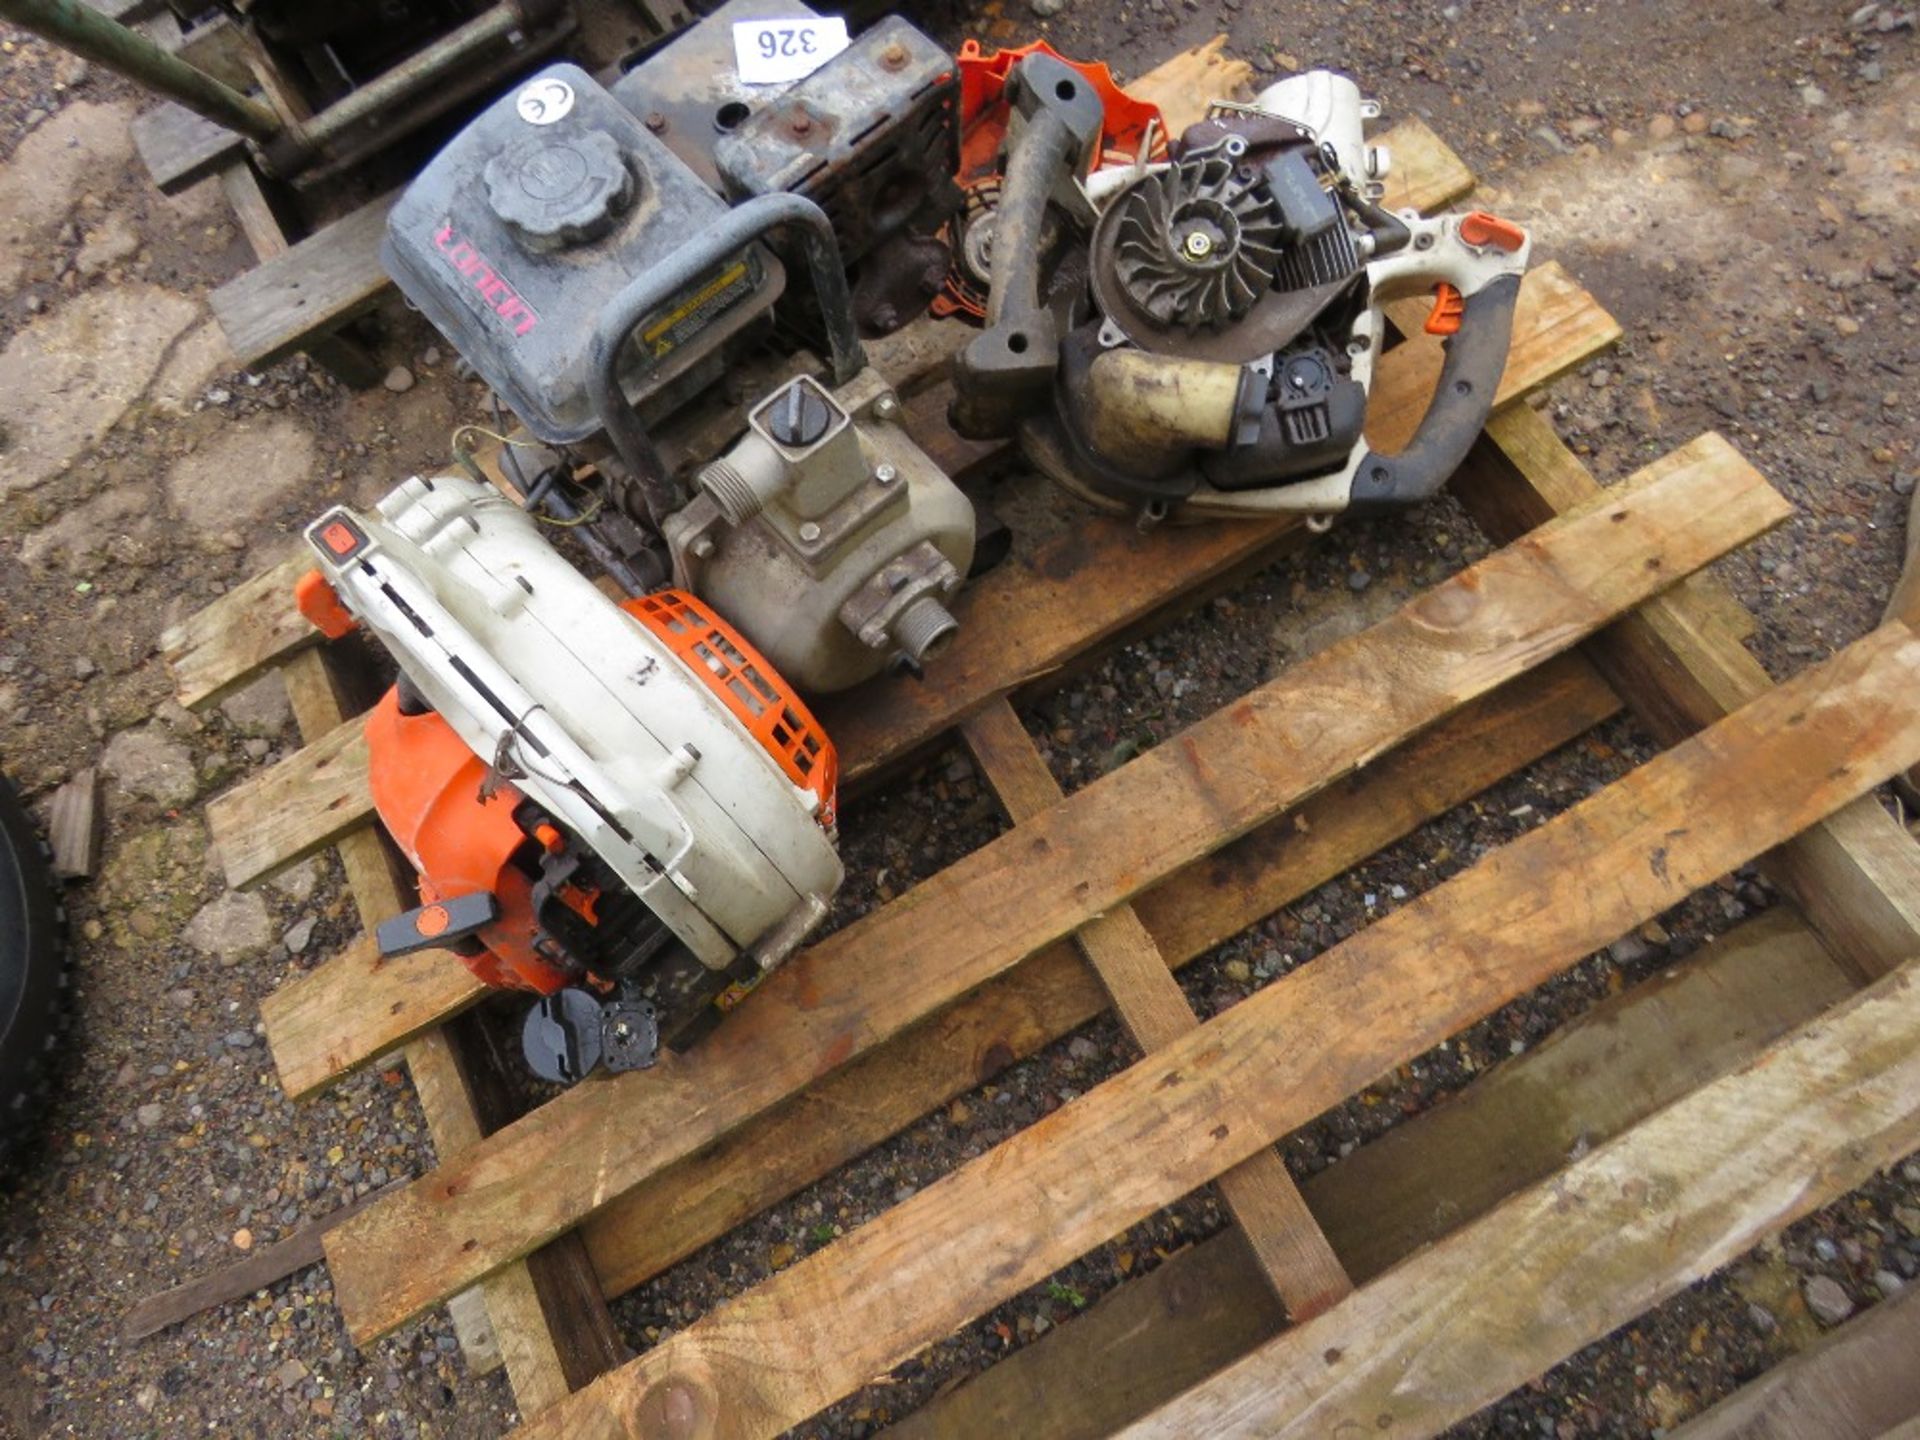 2 X STIHL HAND HELD BLOWERS PLUS A WATER PUMP, PARTS MISSING. THIS LOT IS SOLD UNDER THE AUCTIONE - Image 3 of 3